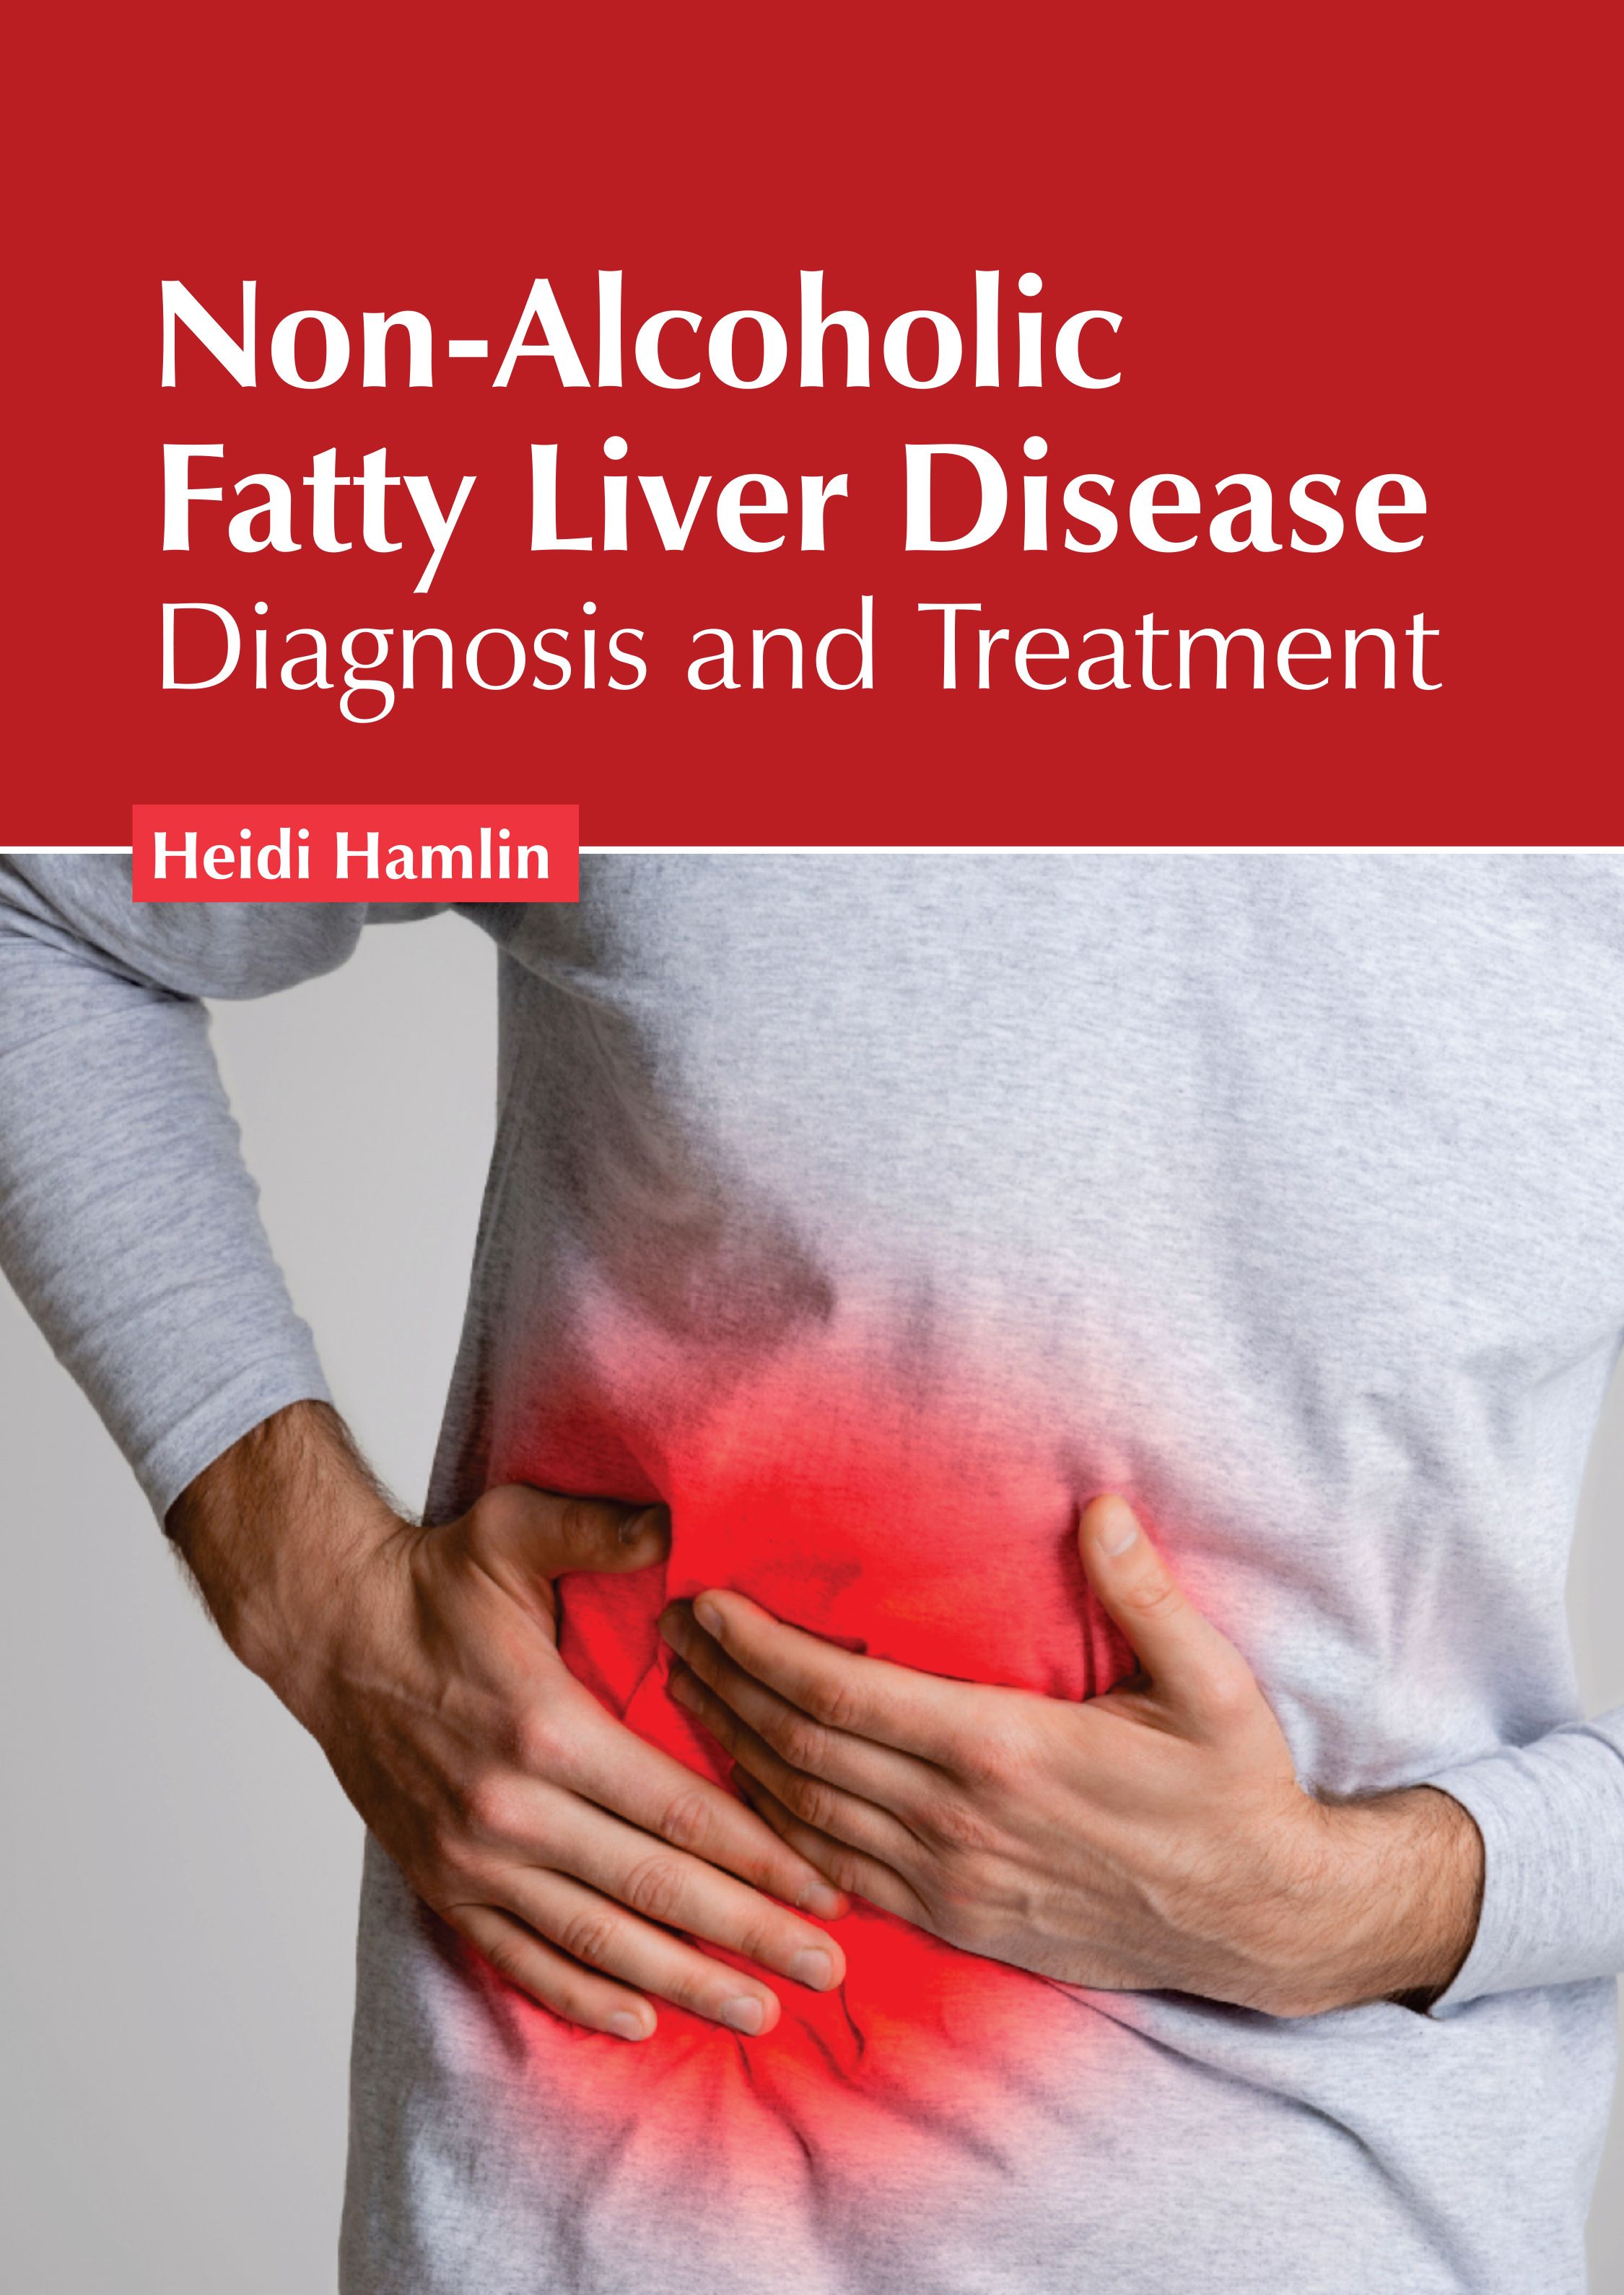 

medical-reference-books/gastroenterology/non-alcoholic-fatty-liver-disease-diagnosis-and-treatment-9781639277568